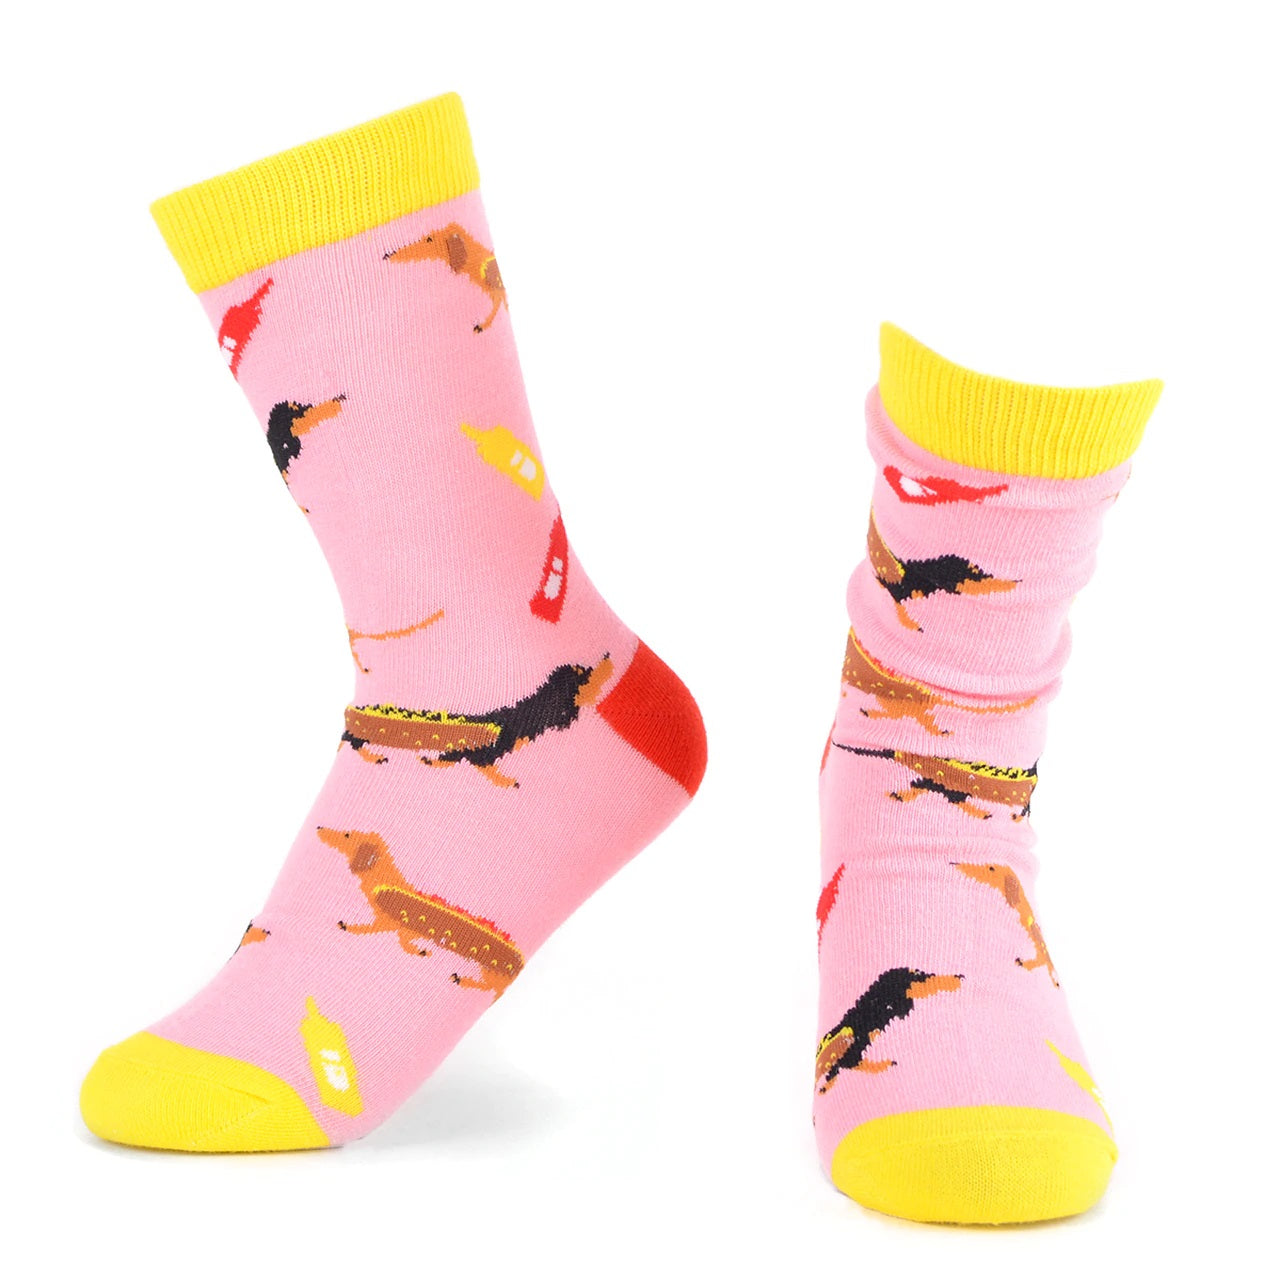 MashasCorner.com   Women's Hotdog Novelty Socks  Add some fun to your outfit with our Novelty Socks. These socks are perfect for when you have to maintain being a professional but still have that burning desire to be fun & silly! These socks are super soft & comfy.  70% Cotton, 25% Polyester, 5% spandex Sock size: 9-11 Shoe size: 4-10 Machine wash, tumble dry low Imported